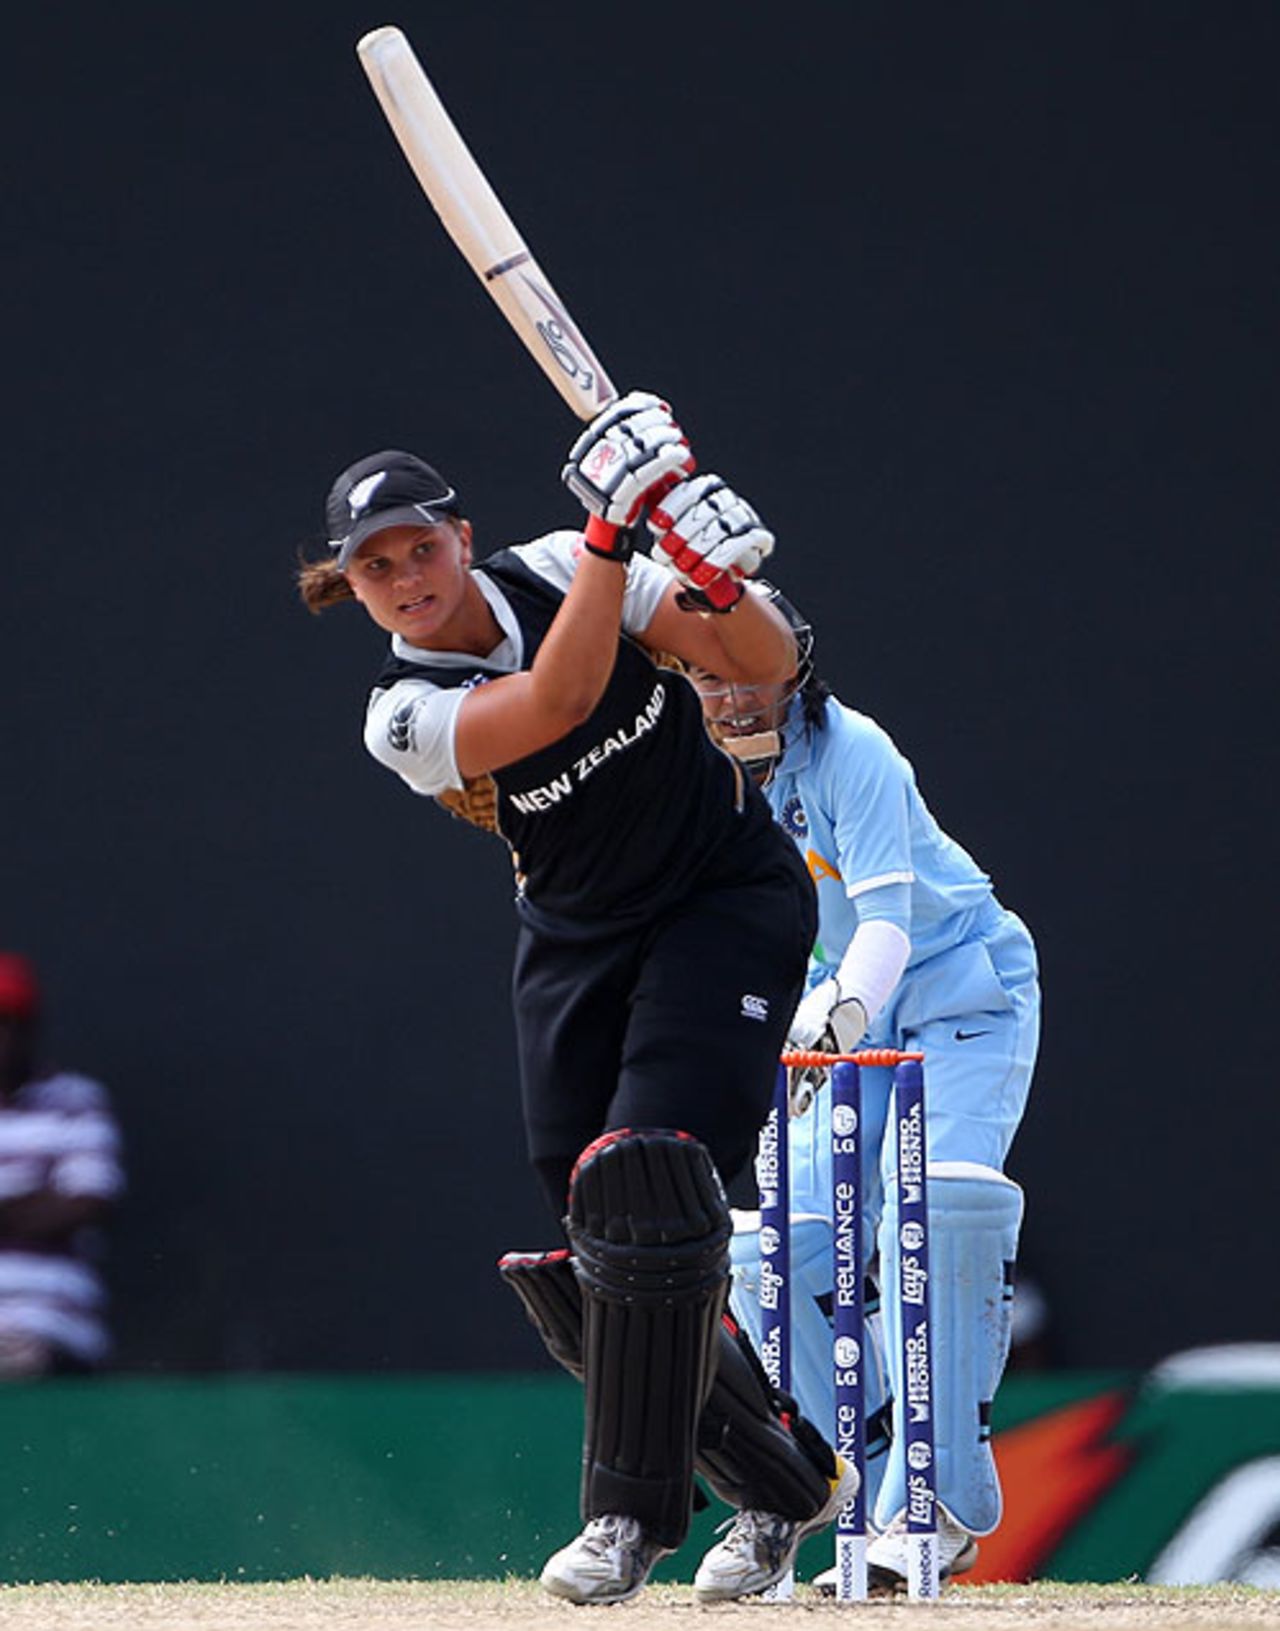 Suzie Bates top-scored for New Zealand in a 10-run win over India, New Zealand Women v India Women, Basseterre, May 6, 2010